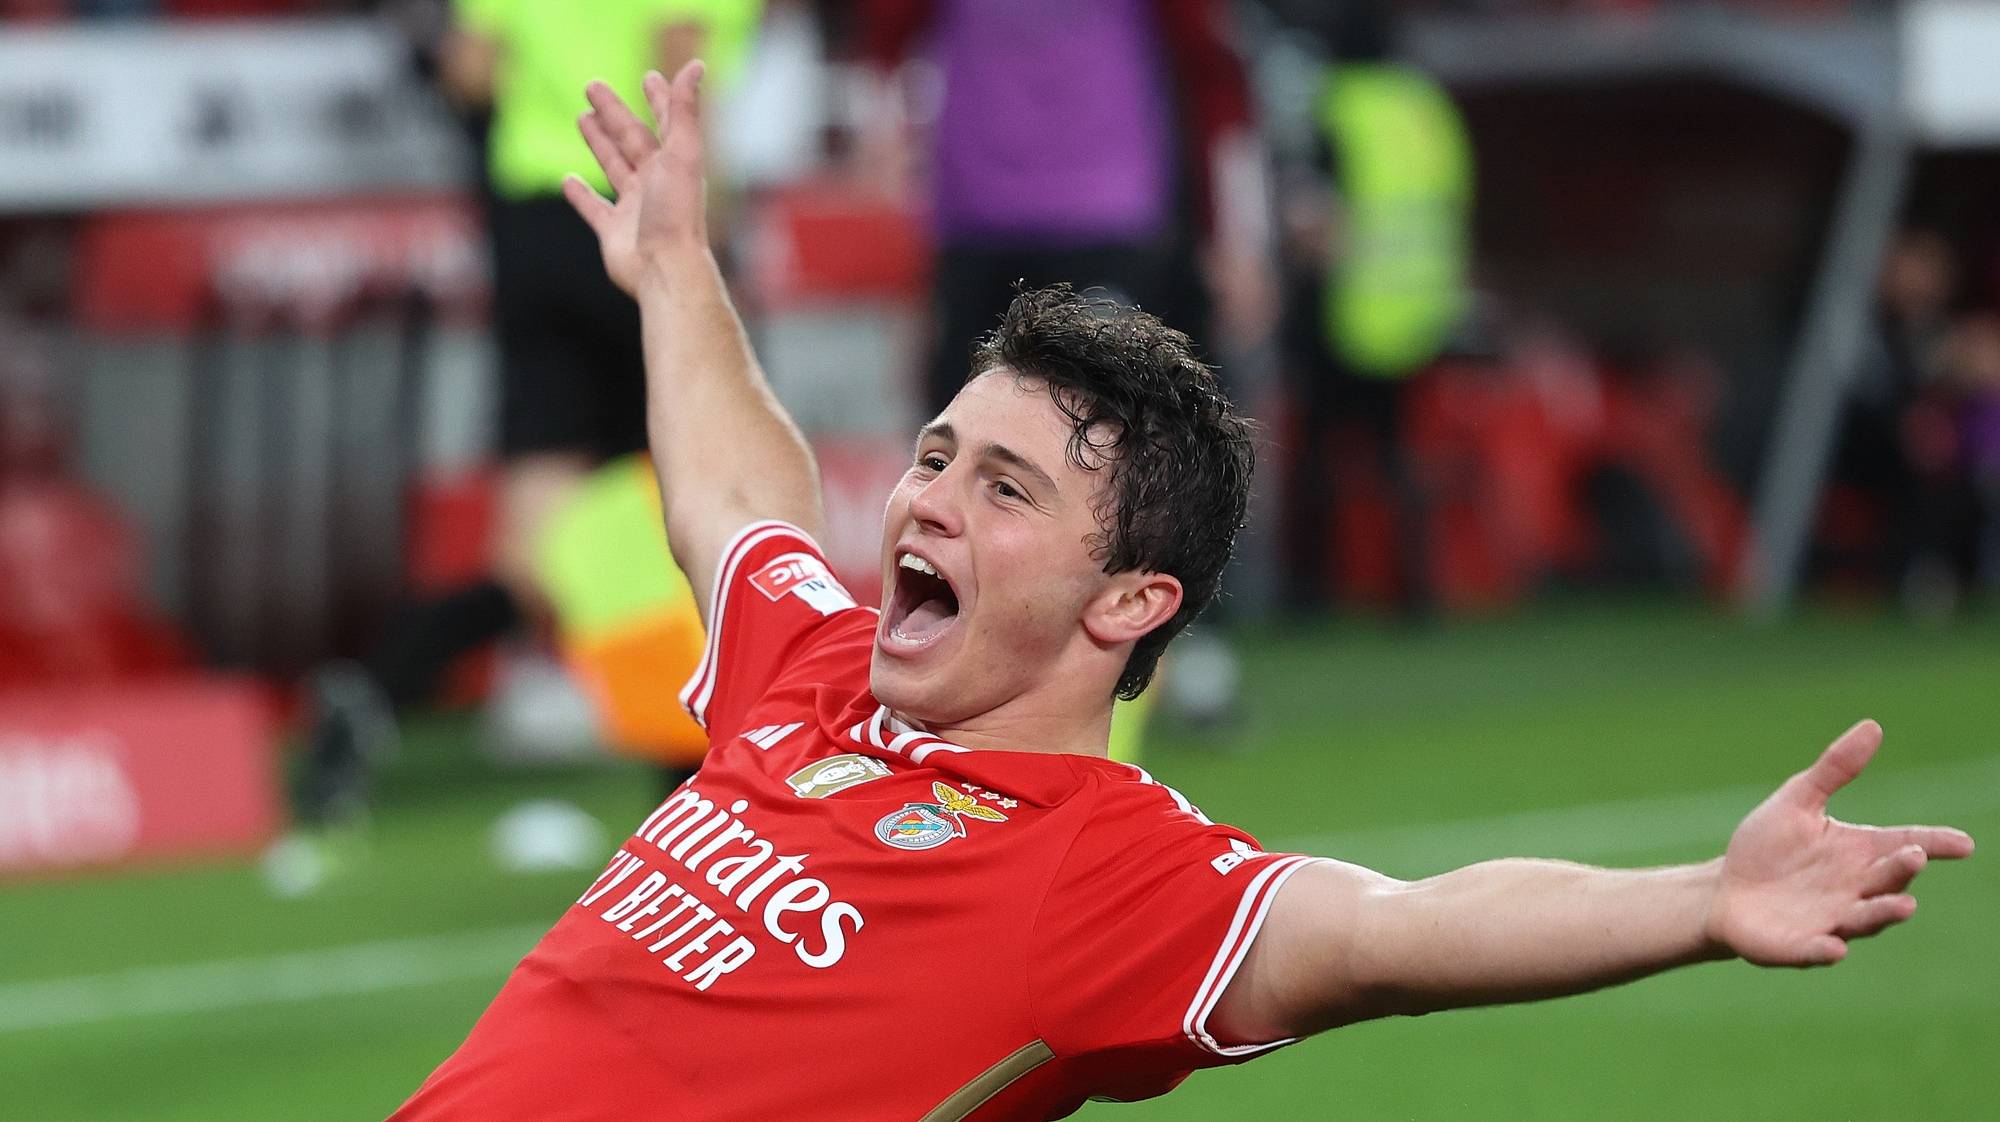 SL Benfica Joao Neves celebrates after scoring the 1-0 lead goal during the Portuguese First League soccer match between SL Benfica and GD Chaves at Luz Stadium in Lisbon, Portugal, 29 March 2024. MANUEL DE ALMEIDA/LUSA